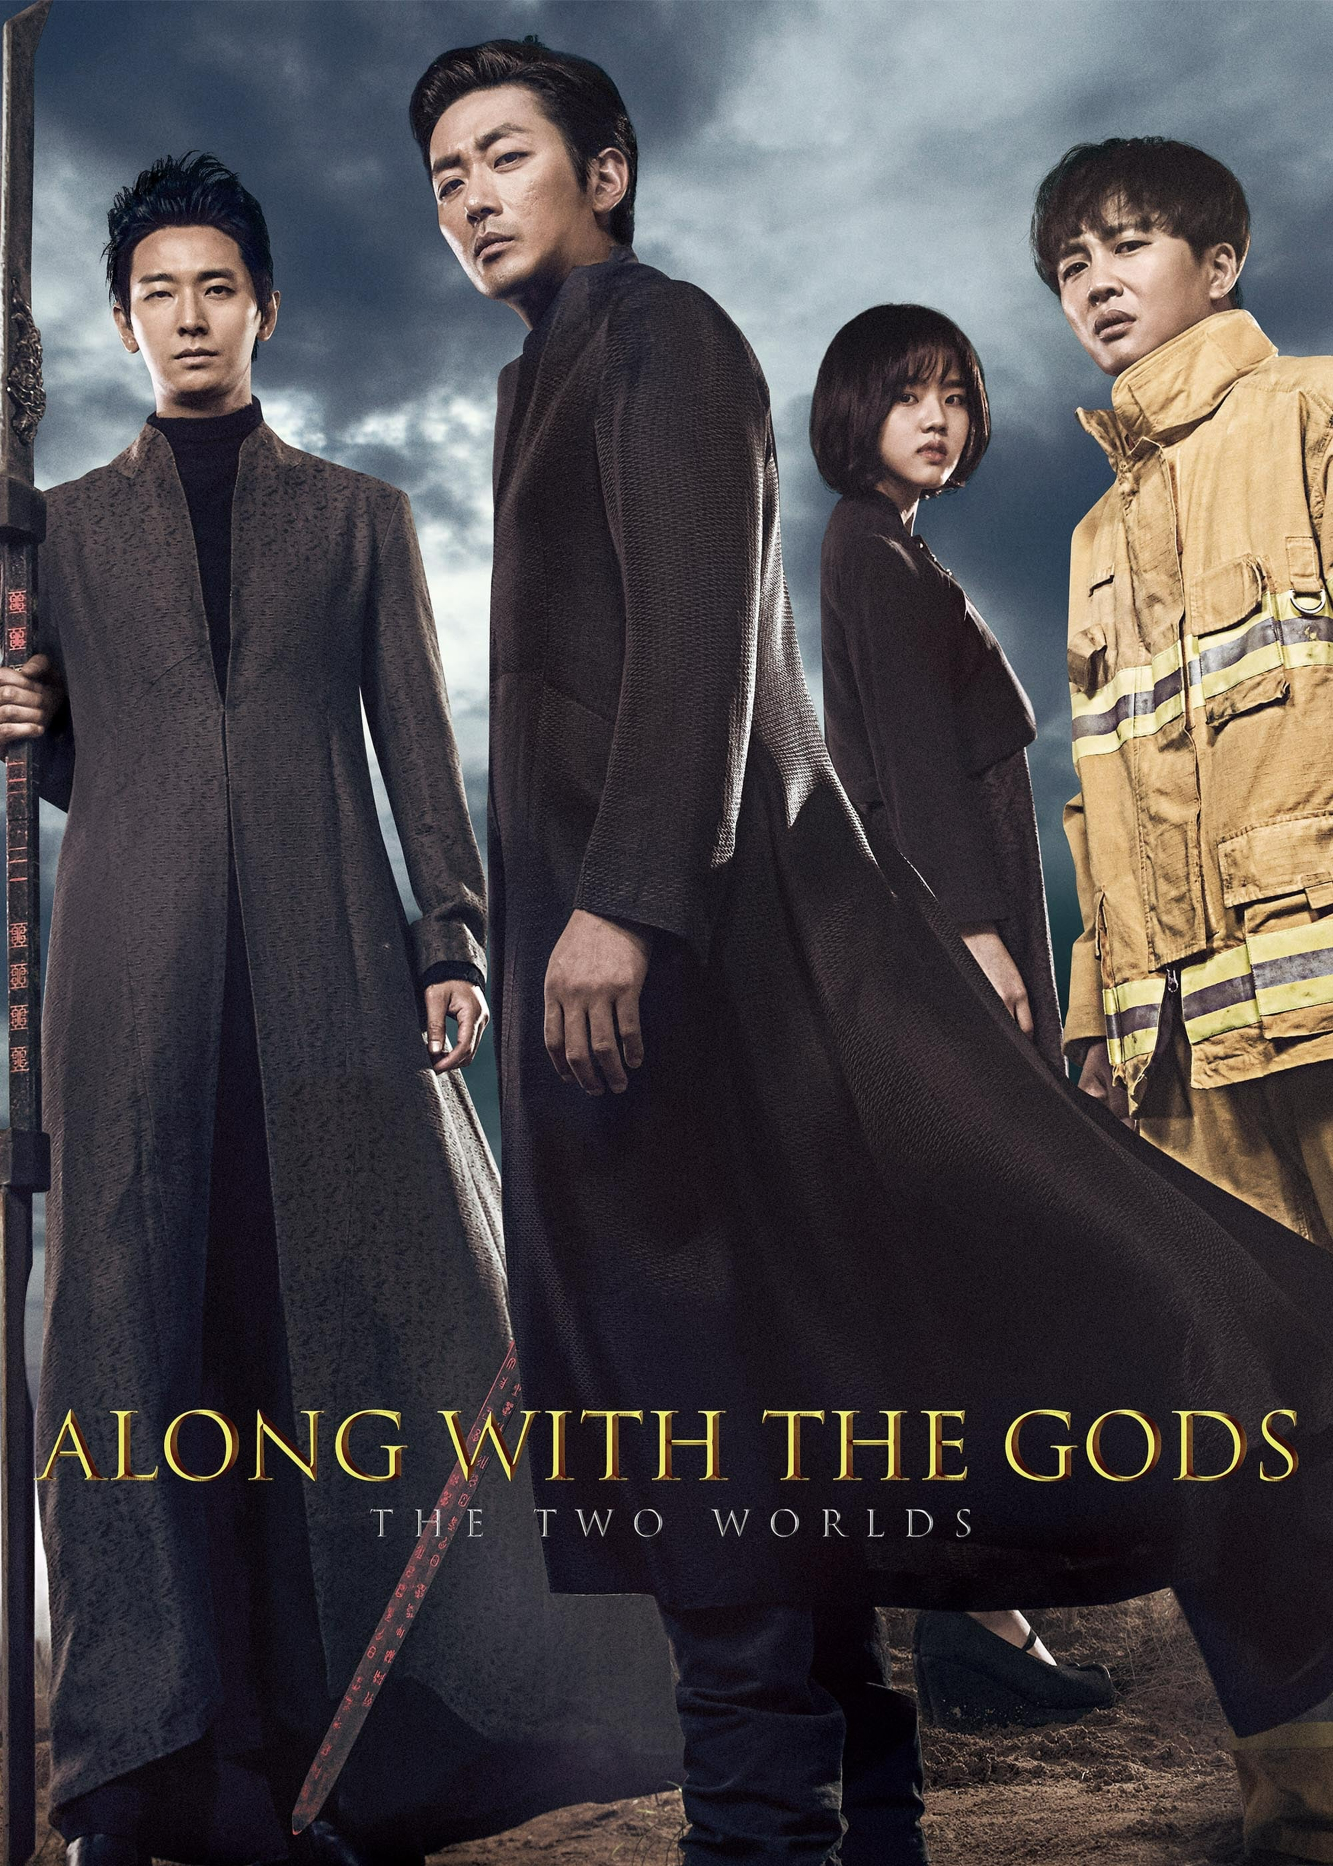 Poster Phim Thử Thách Thần Chết: Giữa Hai Thế Giới (Along With the Gods: The Two Worlds)